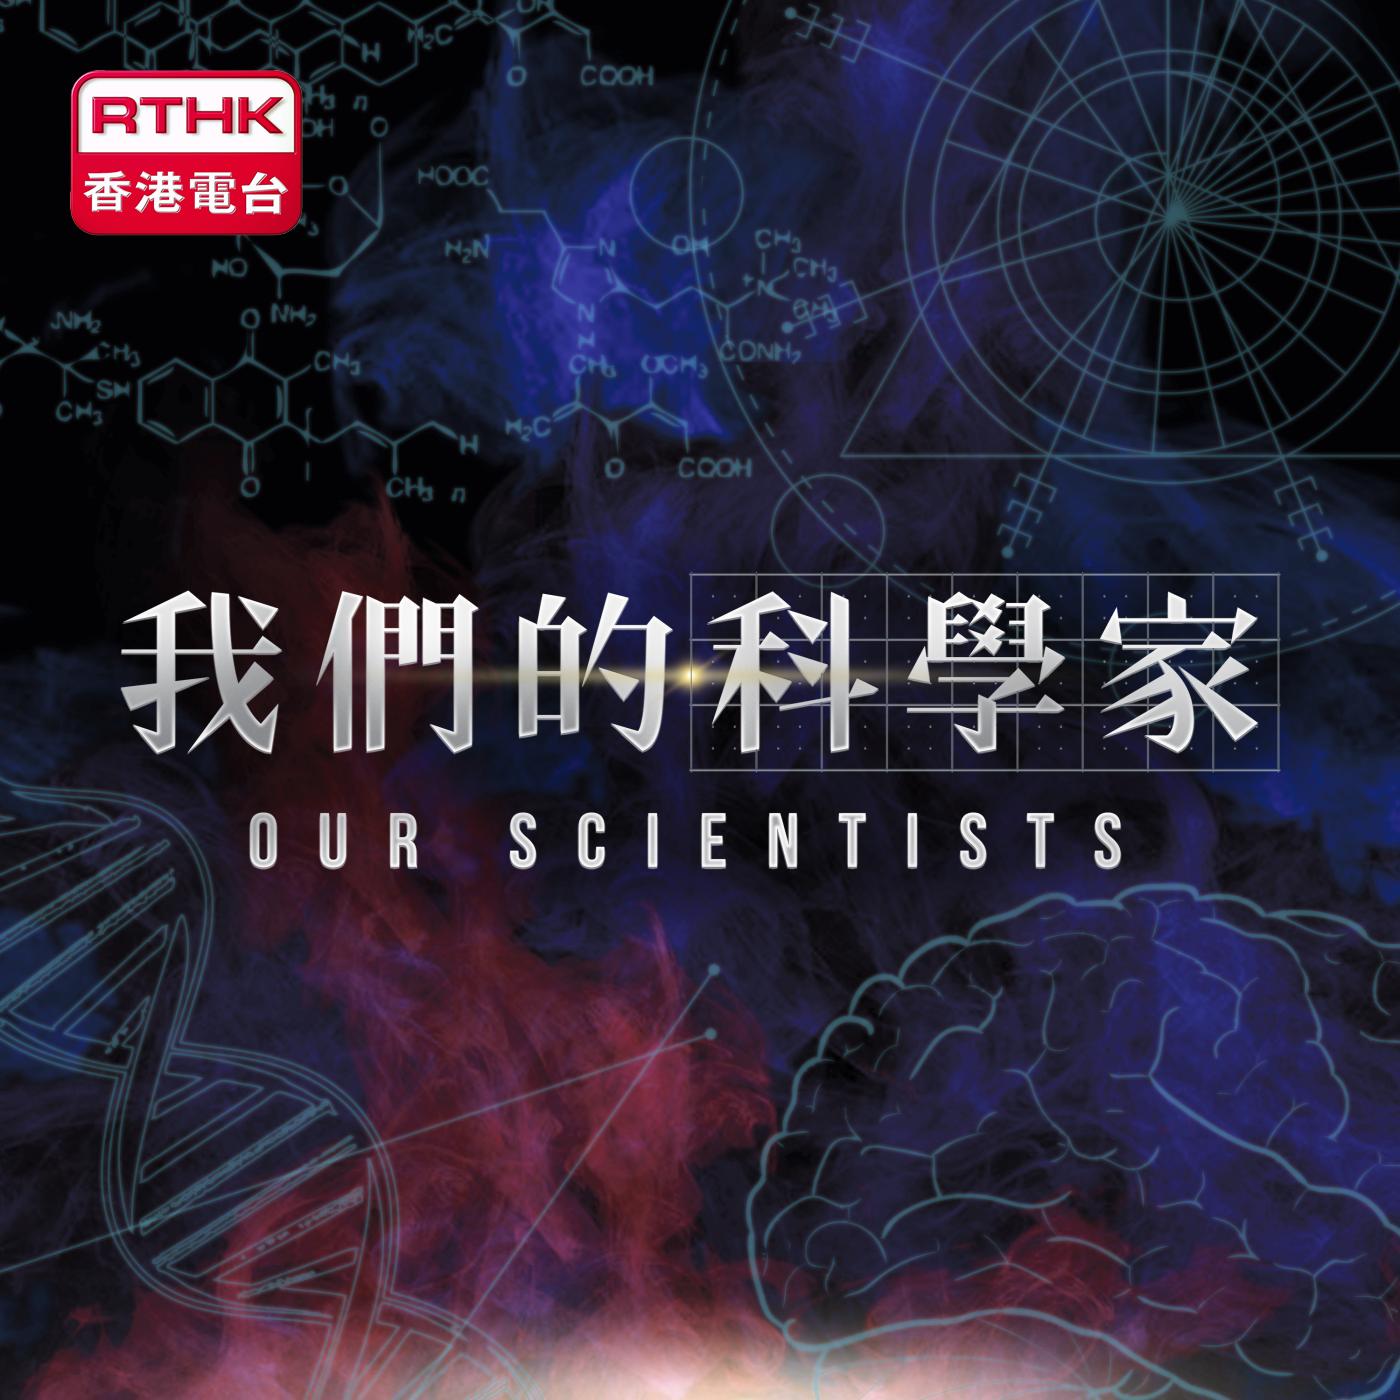 Our Scientists (English Version)